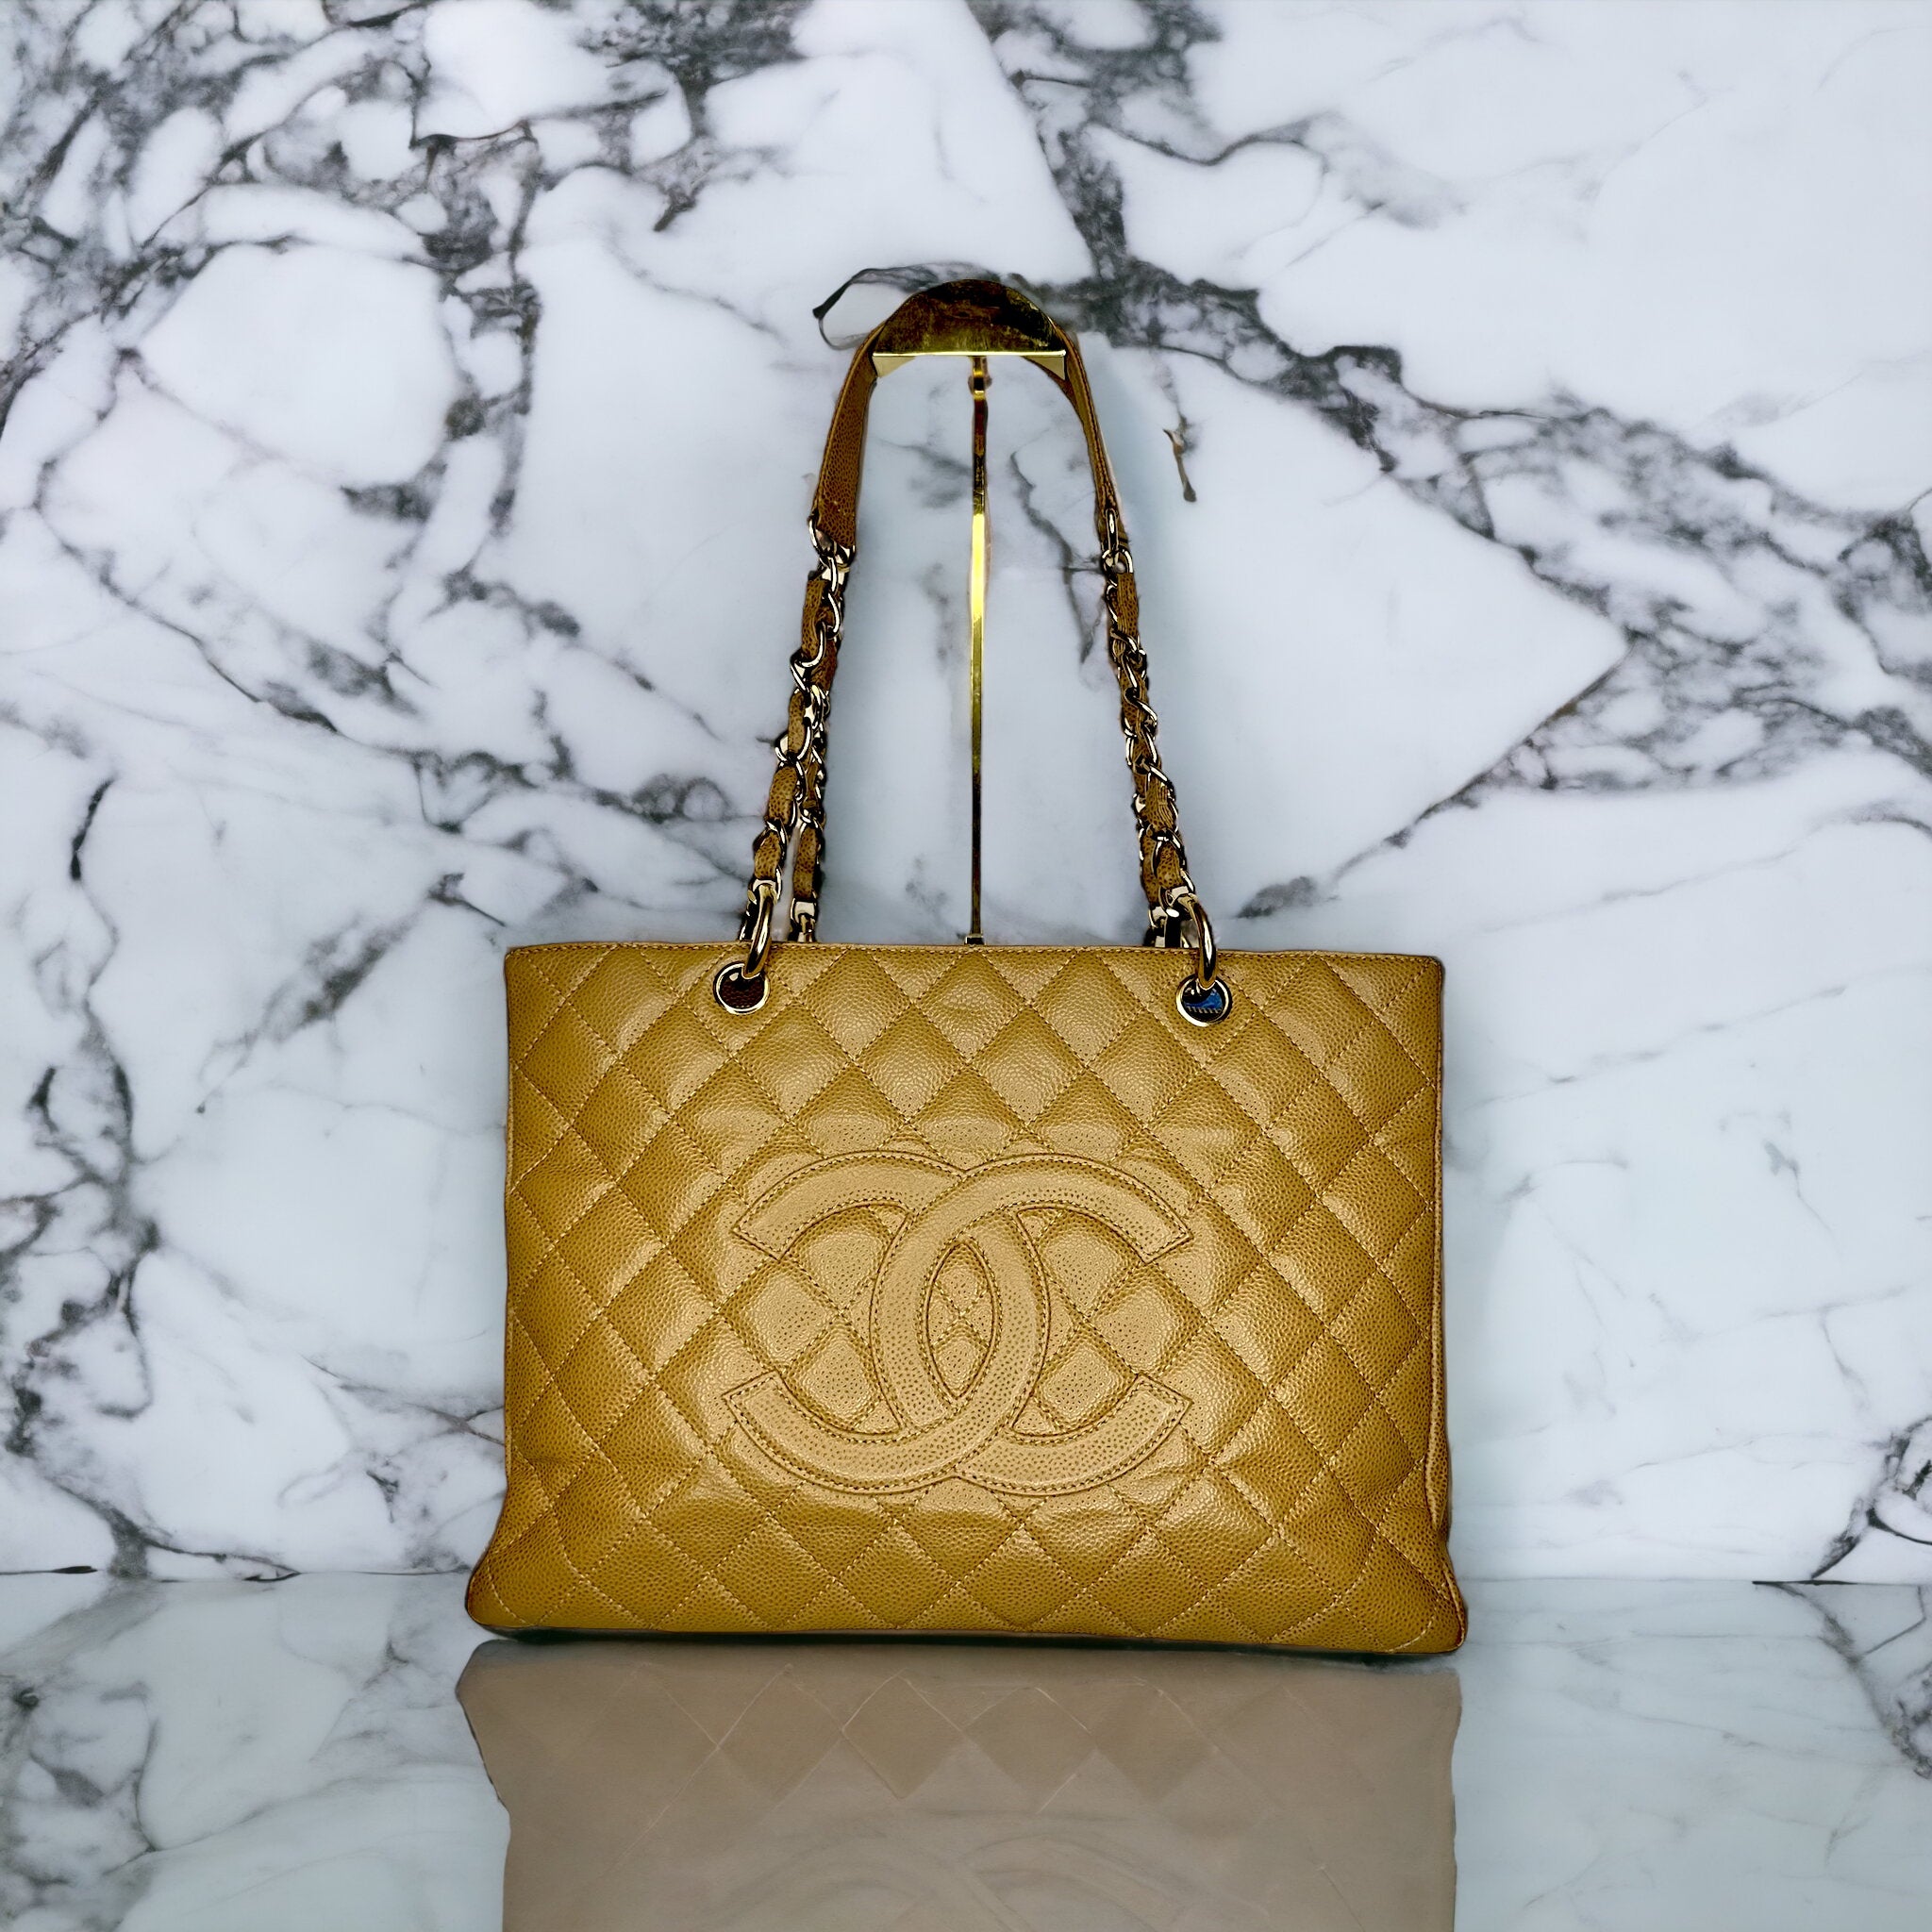 Chanel Caviar Grand Shopping Tote Beige – Now You Glow